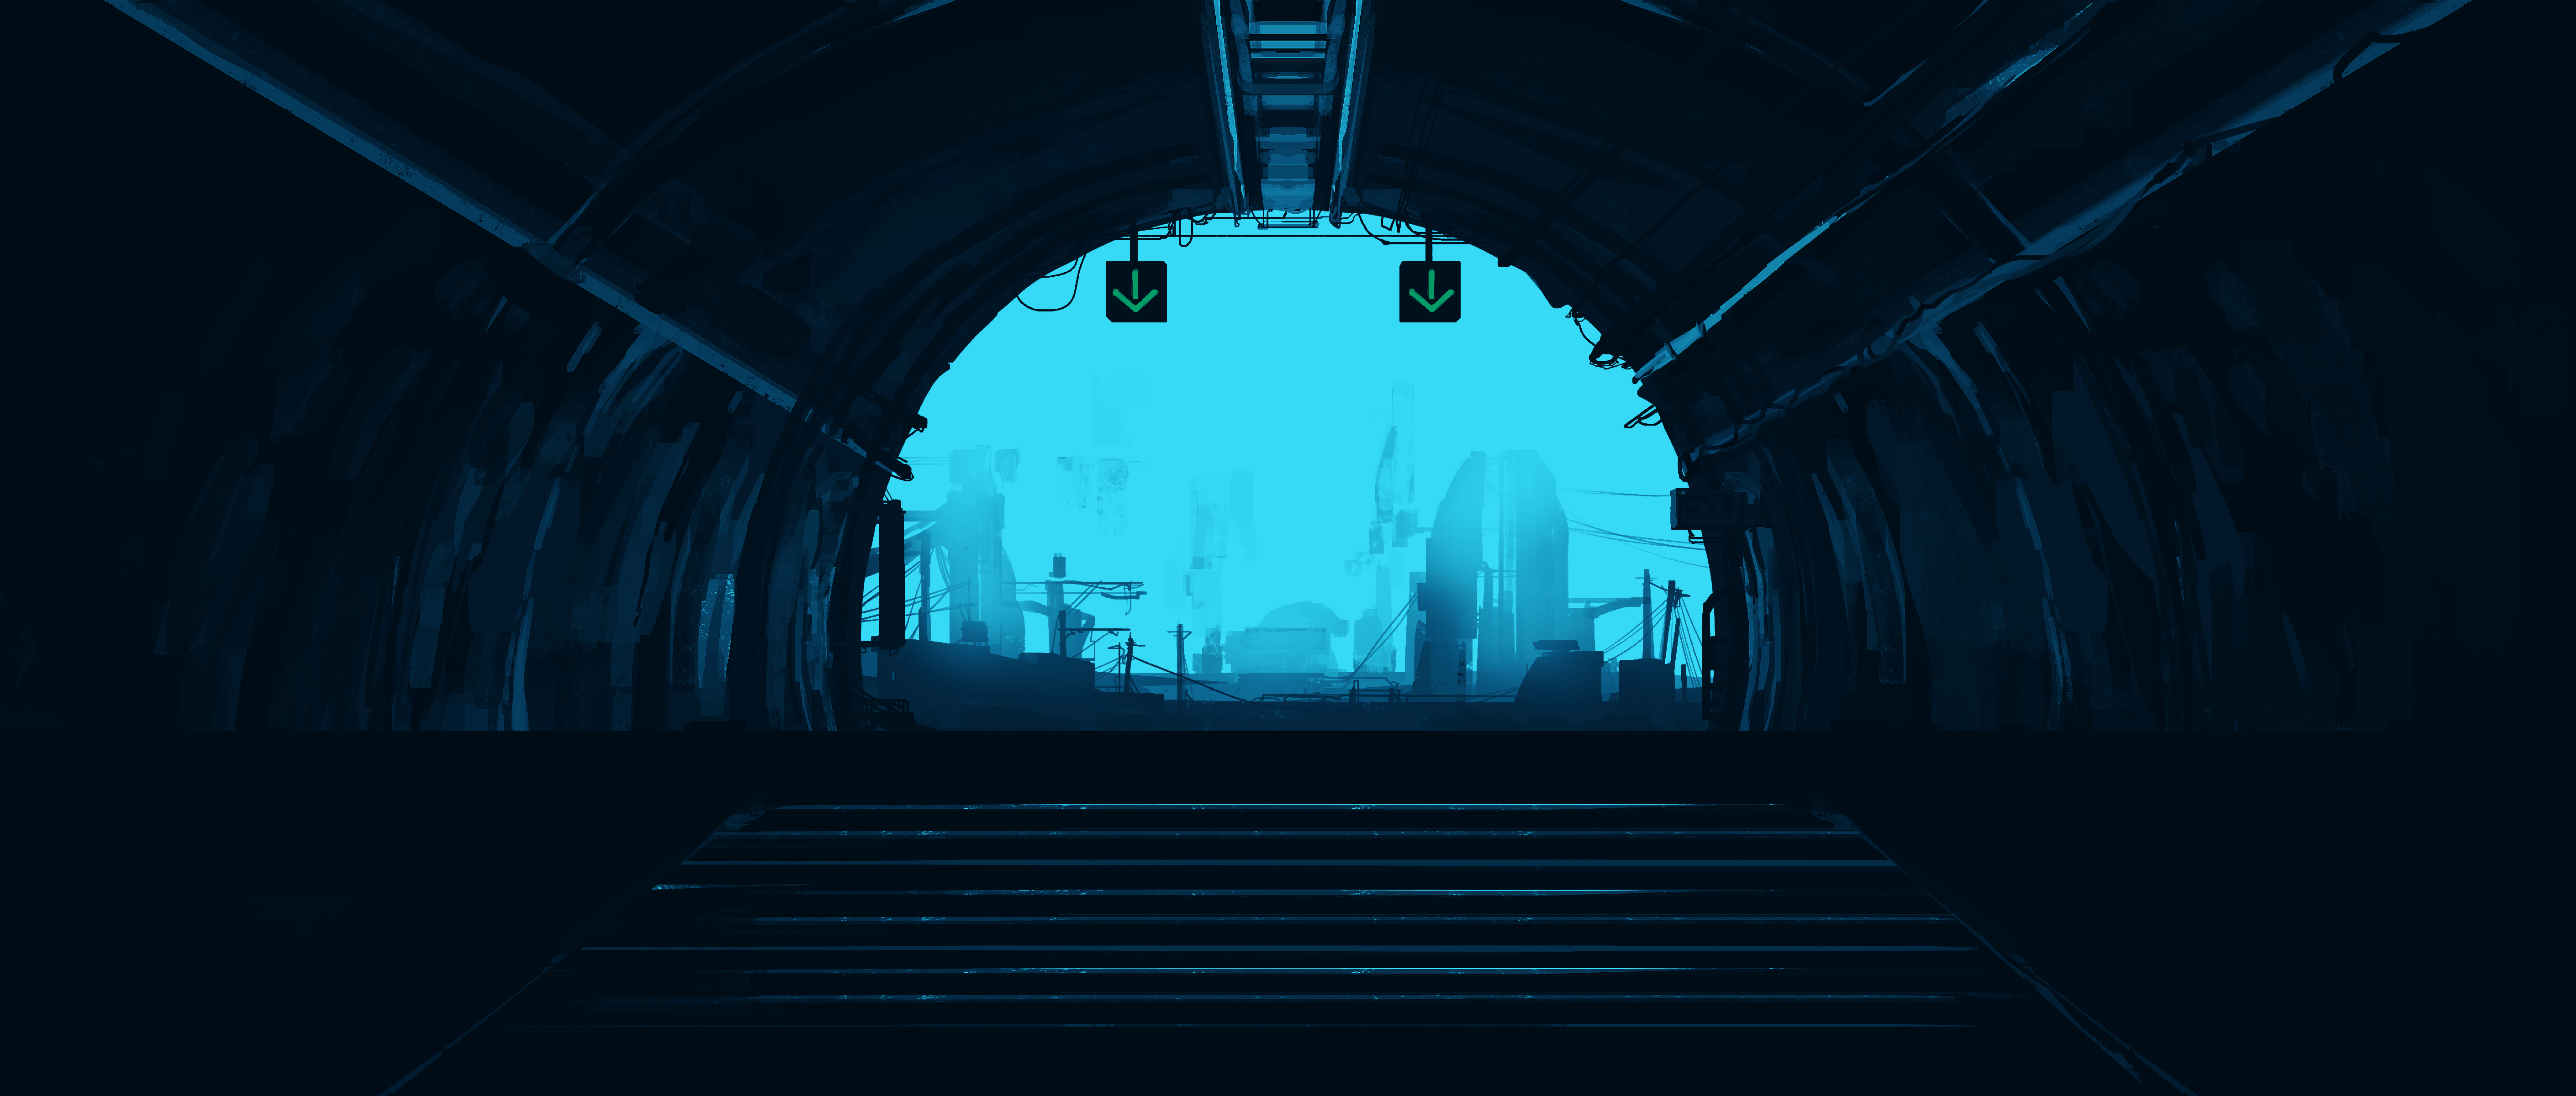 General 5640x2400 Gracile digital art artwork illustration wide screen landscape environment tunnel exit stairs